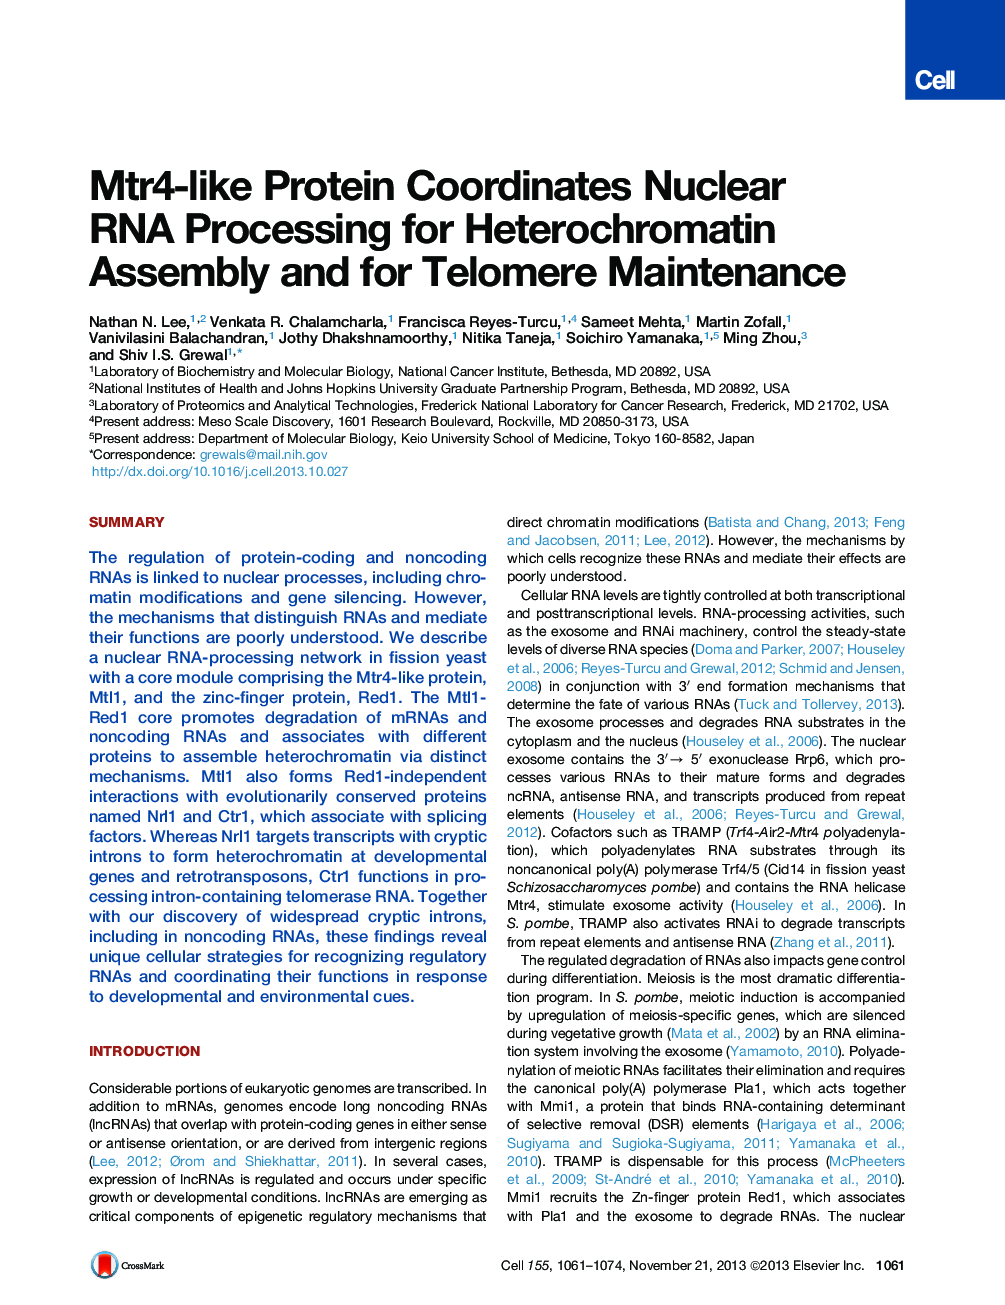 Mtr4-like Protein Coordinates Nuclear RNA Processing for Heterochromatin Assembly and for Telomere Maintenance